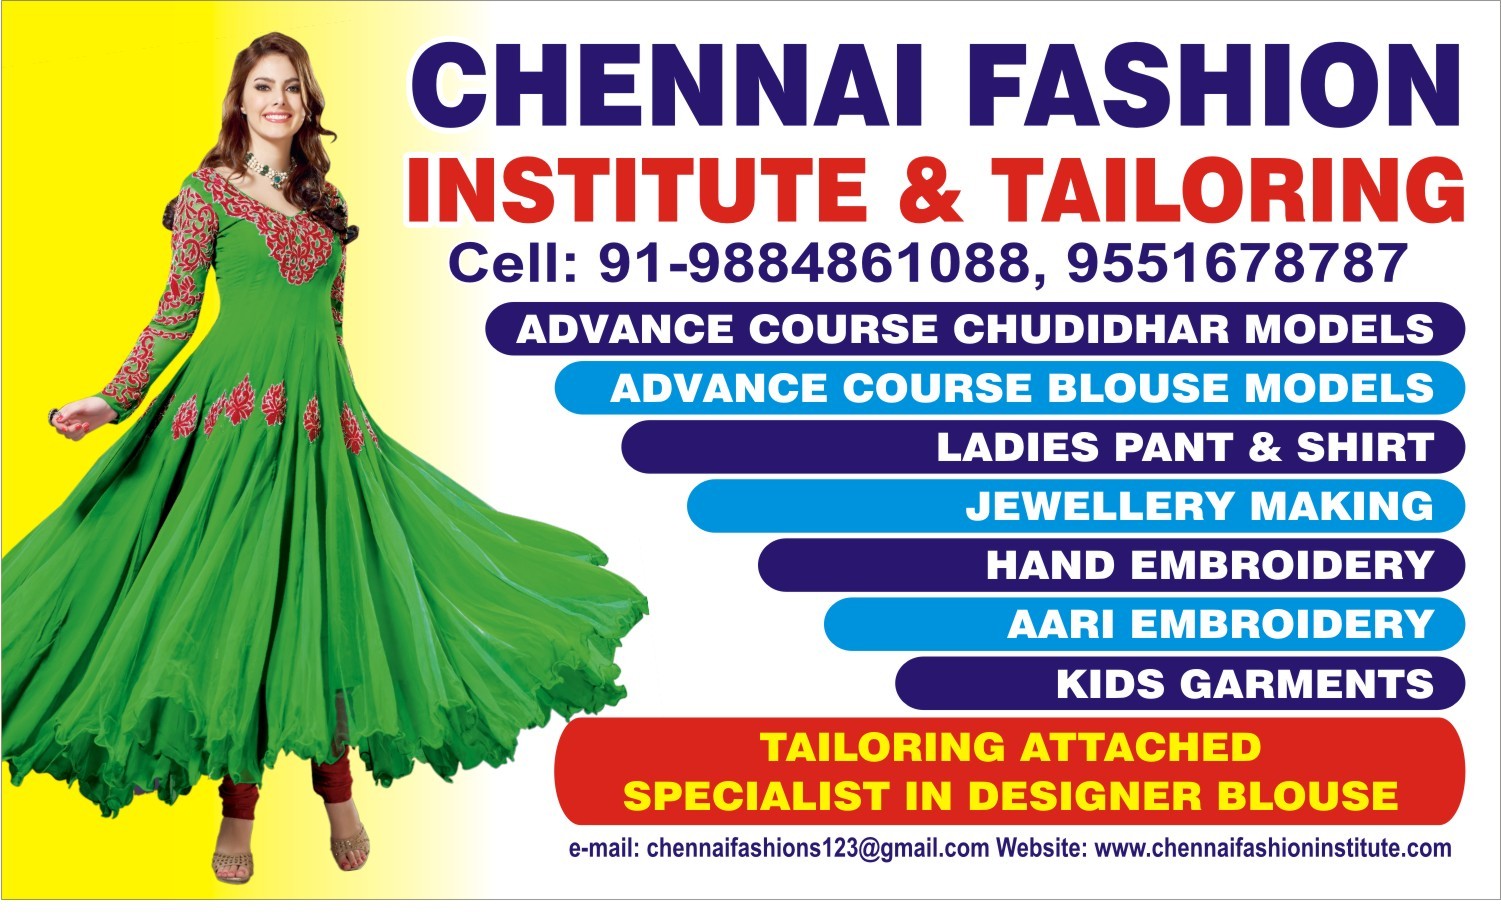 Contact the Best Fashion Institute in India | What is Seams and seam finishes